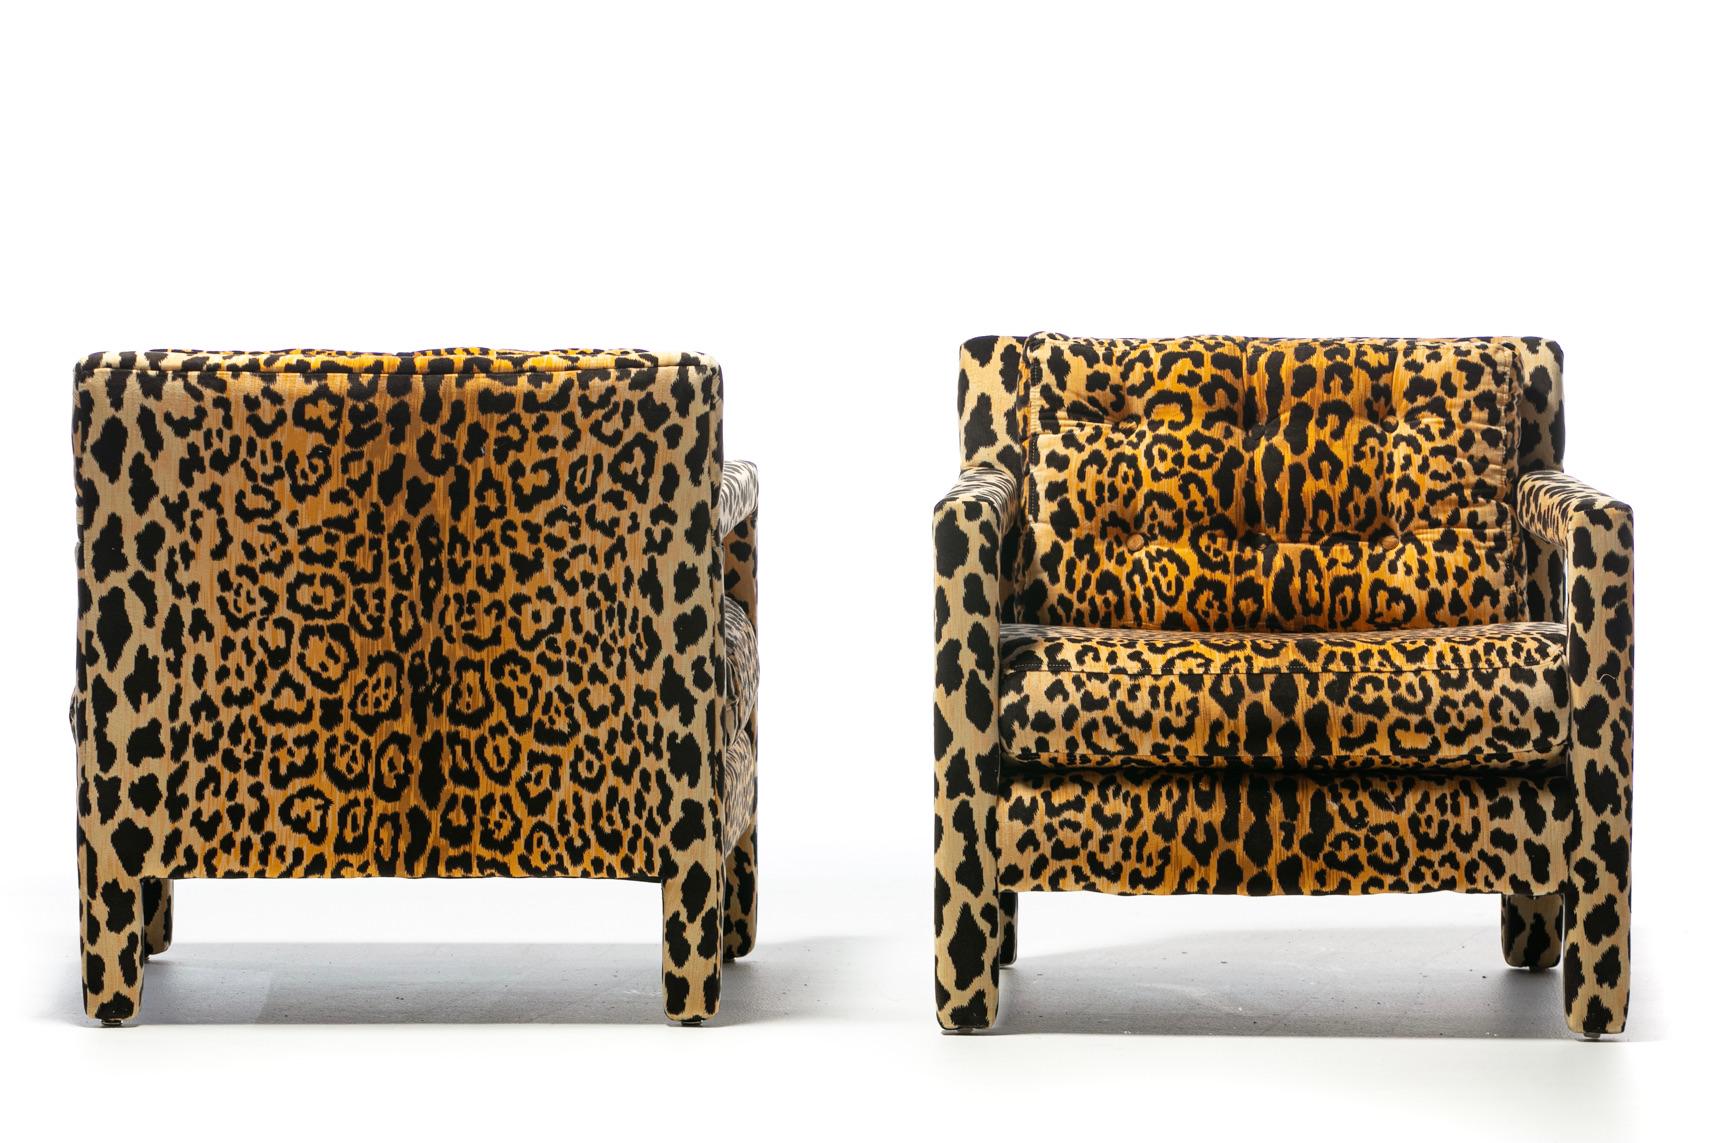 Upholstery Pair of Milo Baughman Style Mid Century Parsons Chairs in Leopard Velvet c. 1970 For Sale